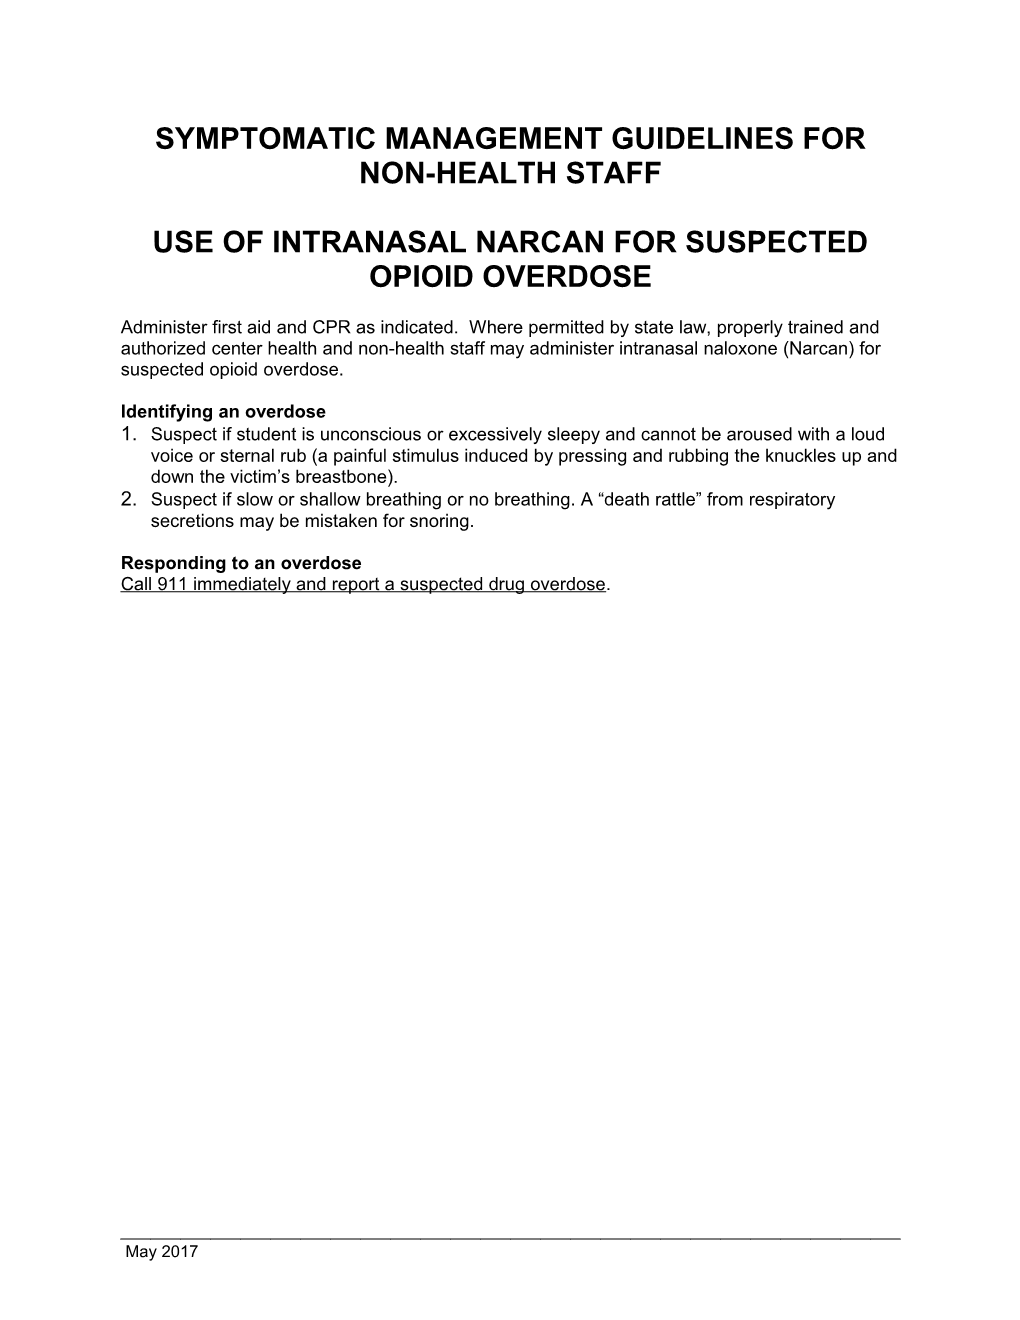 SMG for Non-Health Staff Use of Intranasal Narcan for Suspected Opioid Overdose